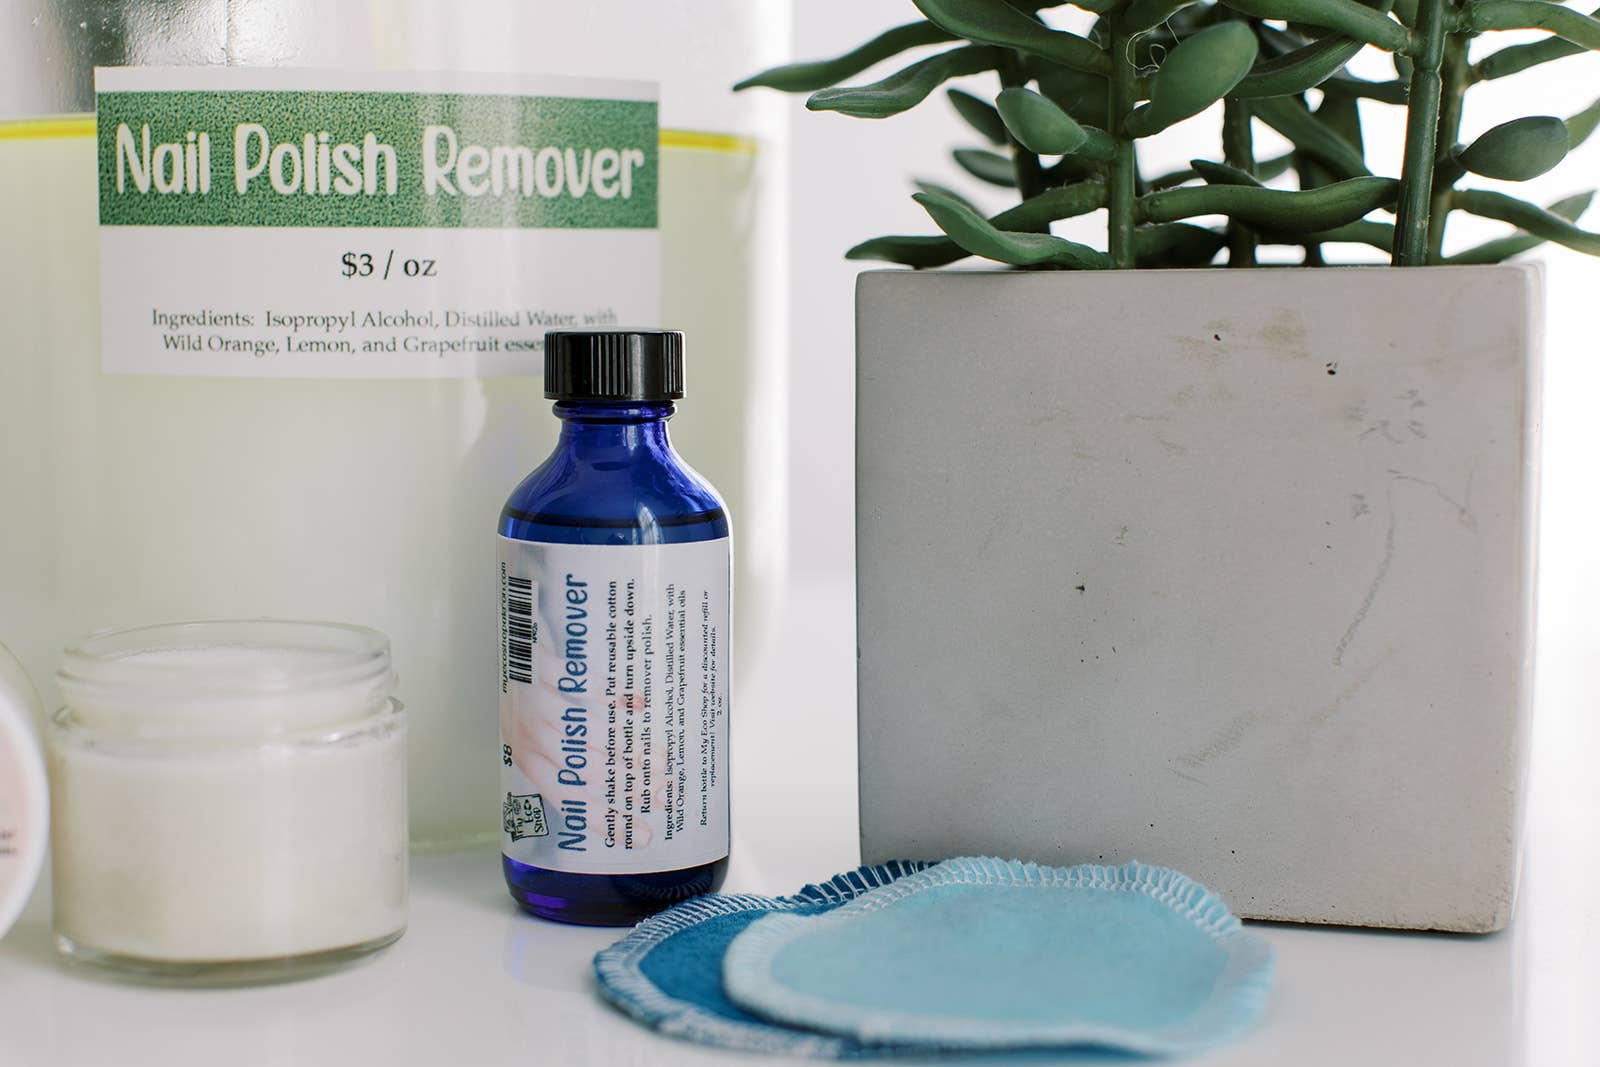 Nail Polish Remover: Glass Bottle My Eco Shop